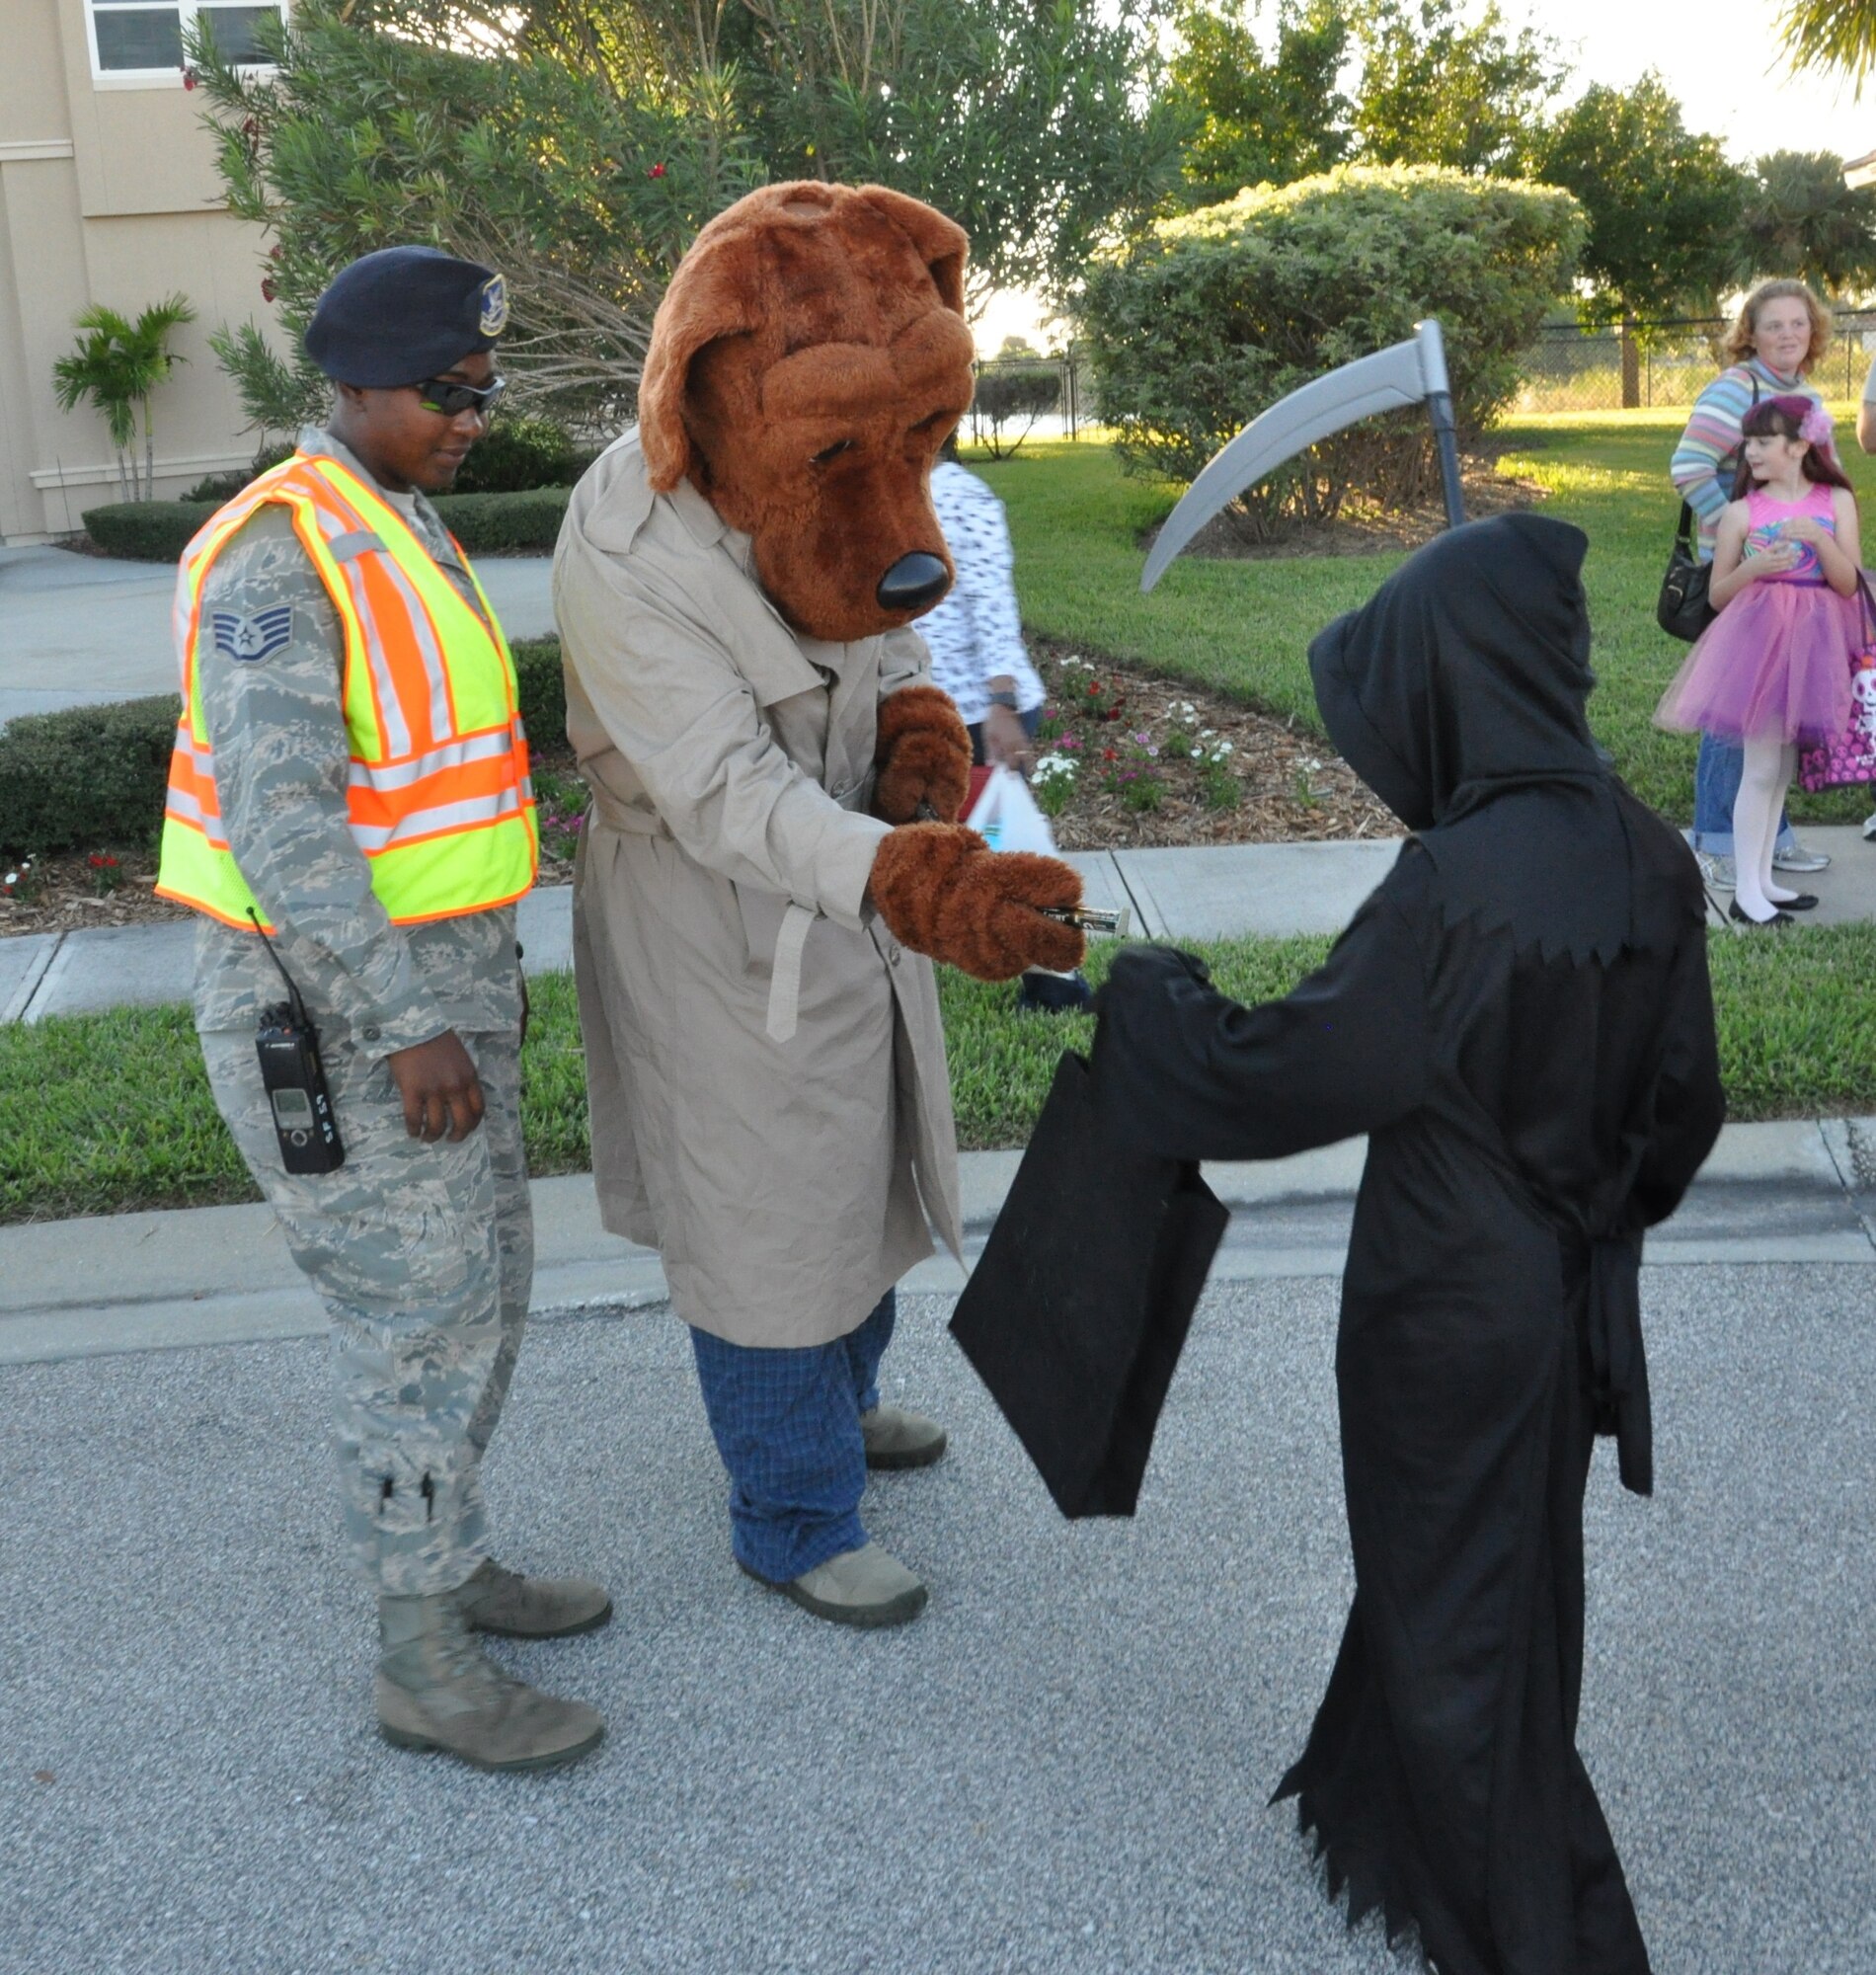 Pumpkin Patrol personnel and McGruff the Crime Dog hand out glow sticks to children in the base community.  